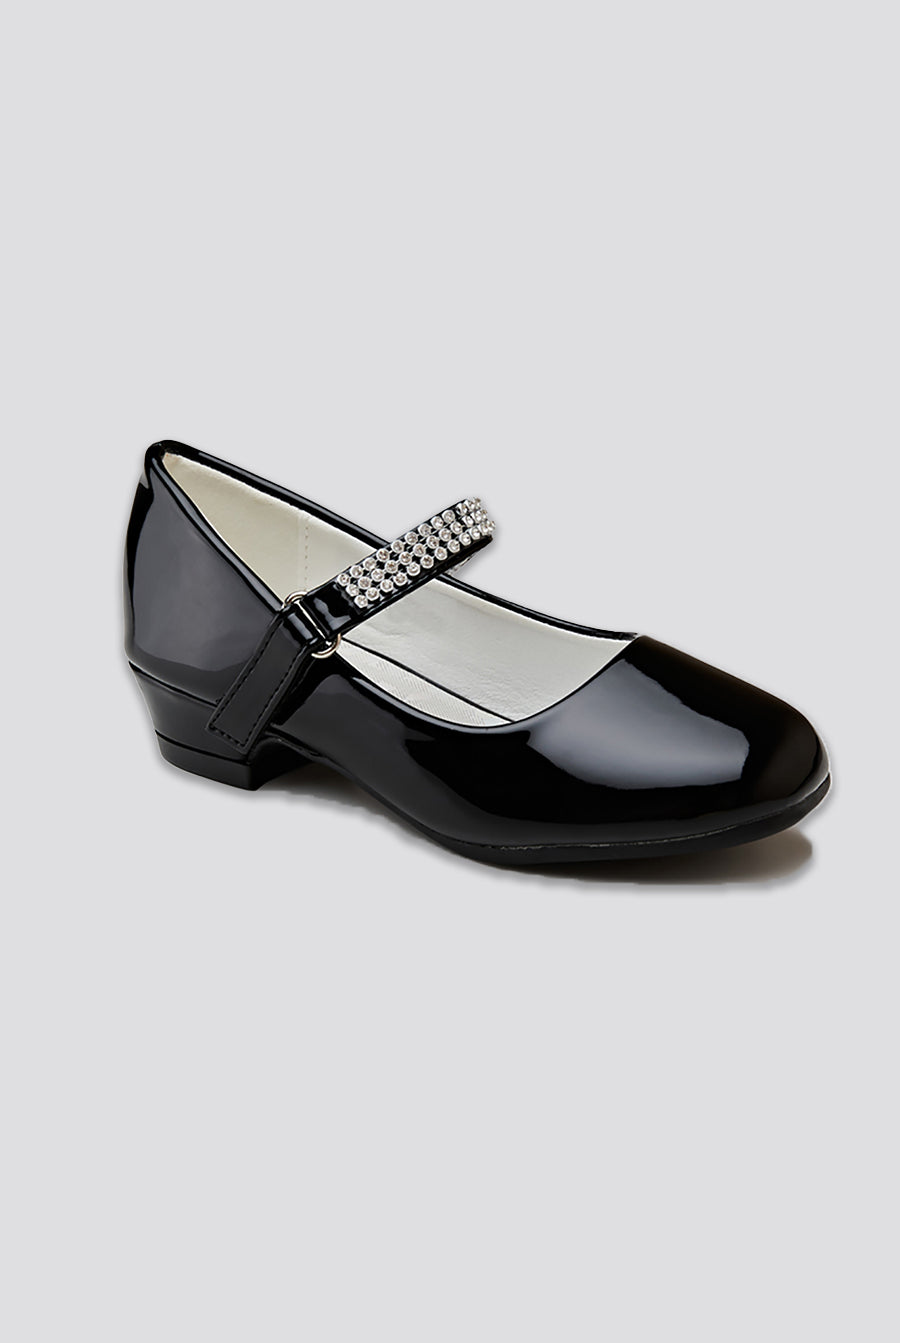 Low Heel Mary Jane Shoes black side